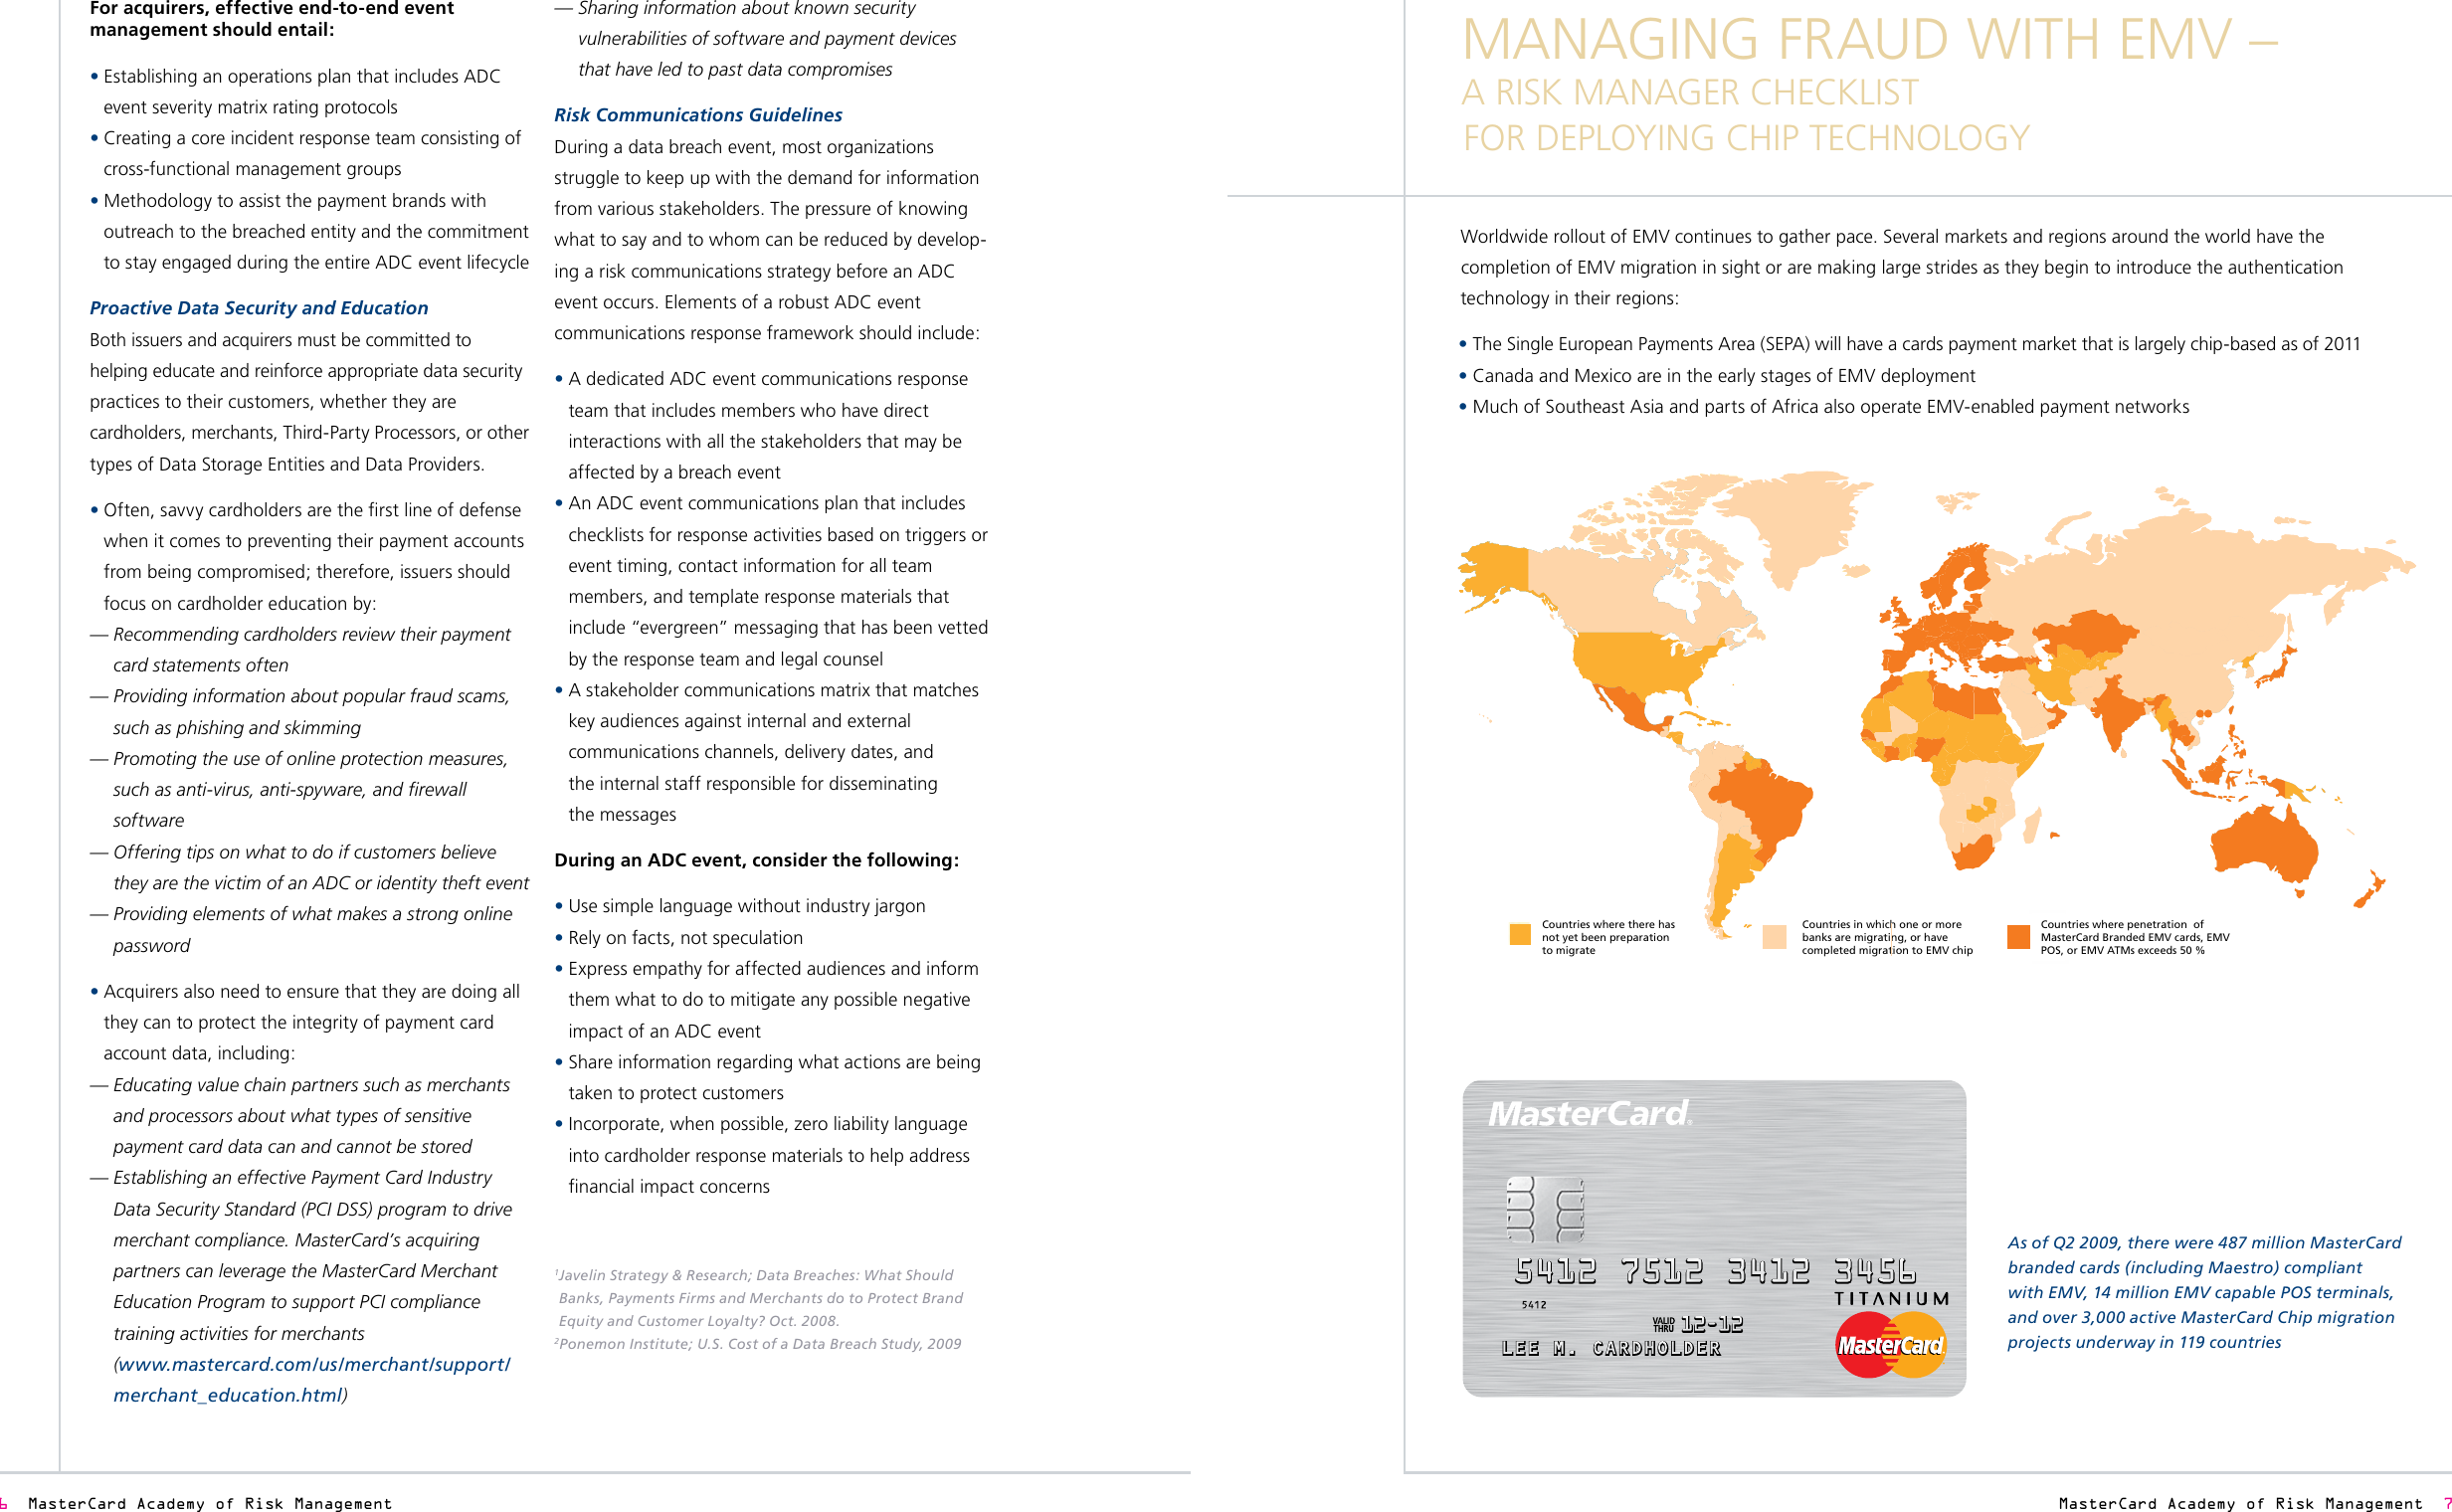 Page 1 of 4 - Managing Fraud With EMV